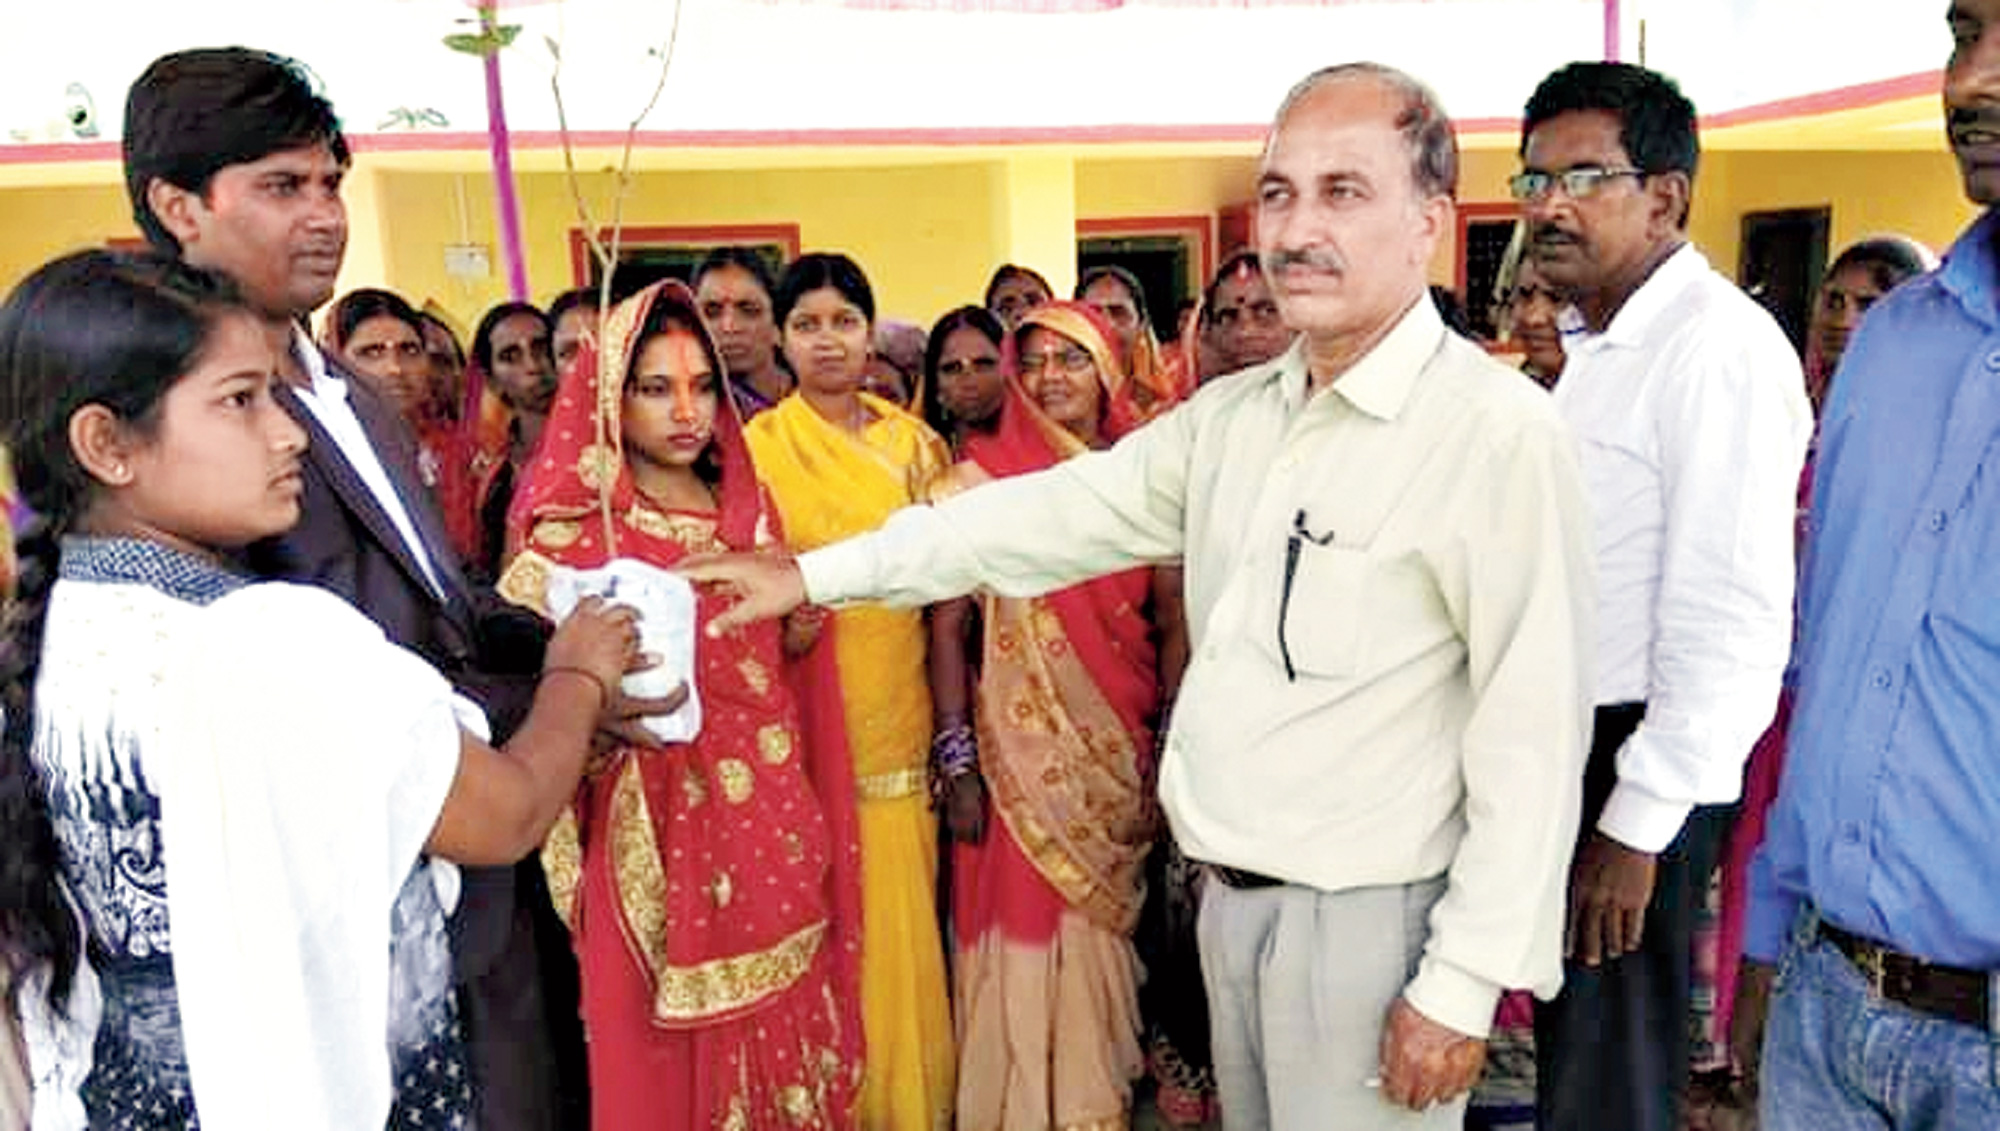 Best wishes: Shivshankar Gope presents saplings to a newly wed couple in Giridih last month.